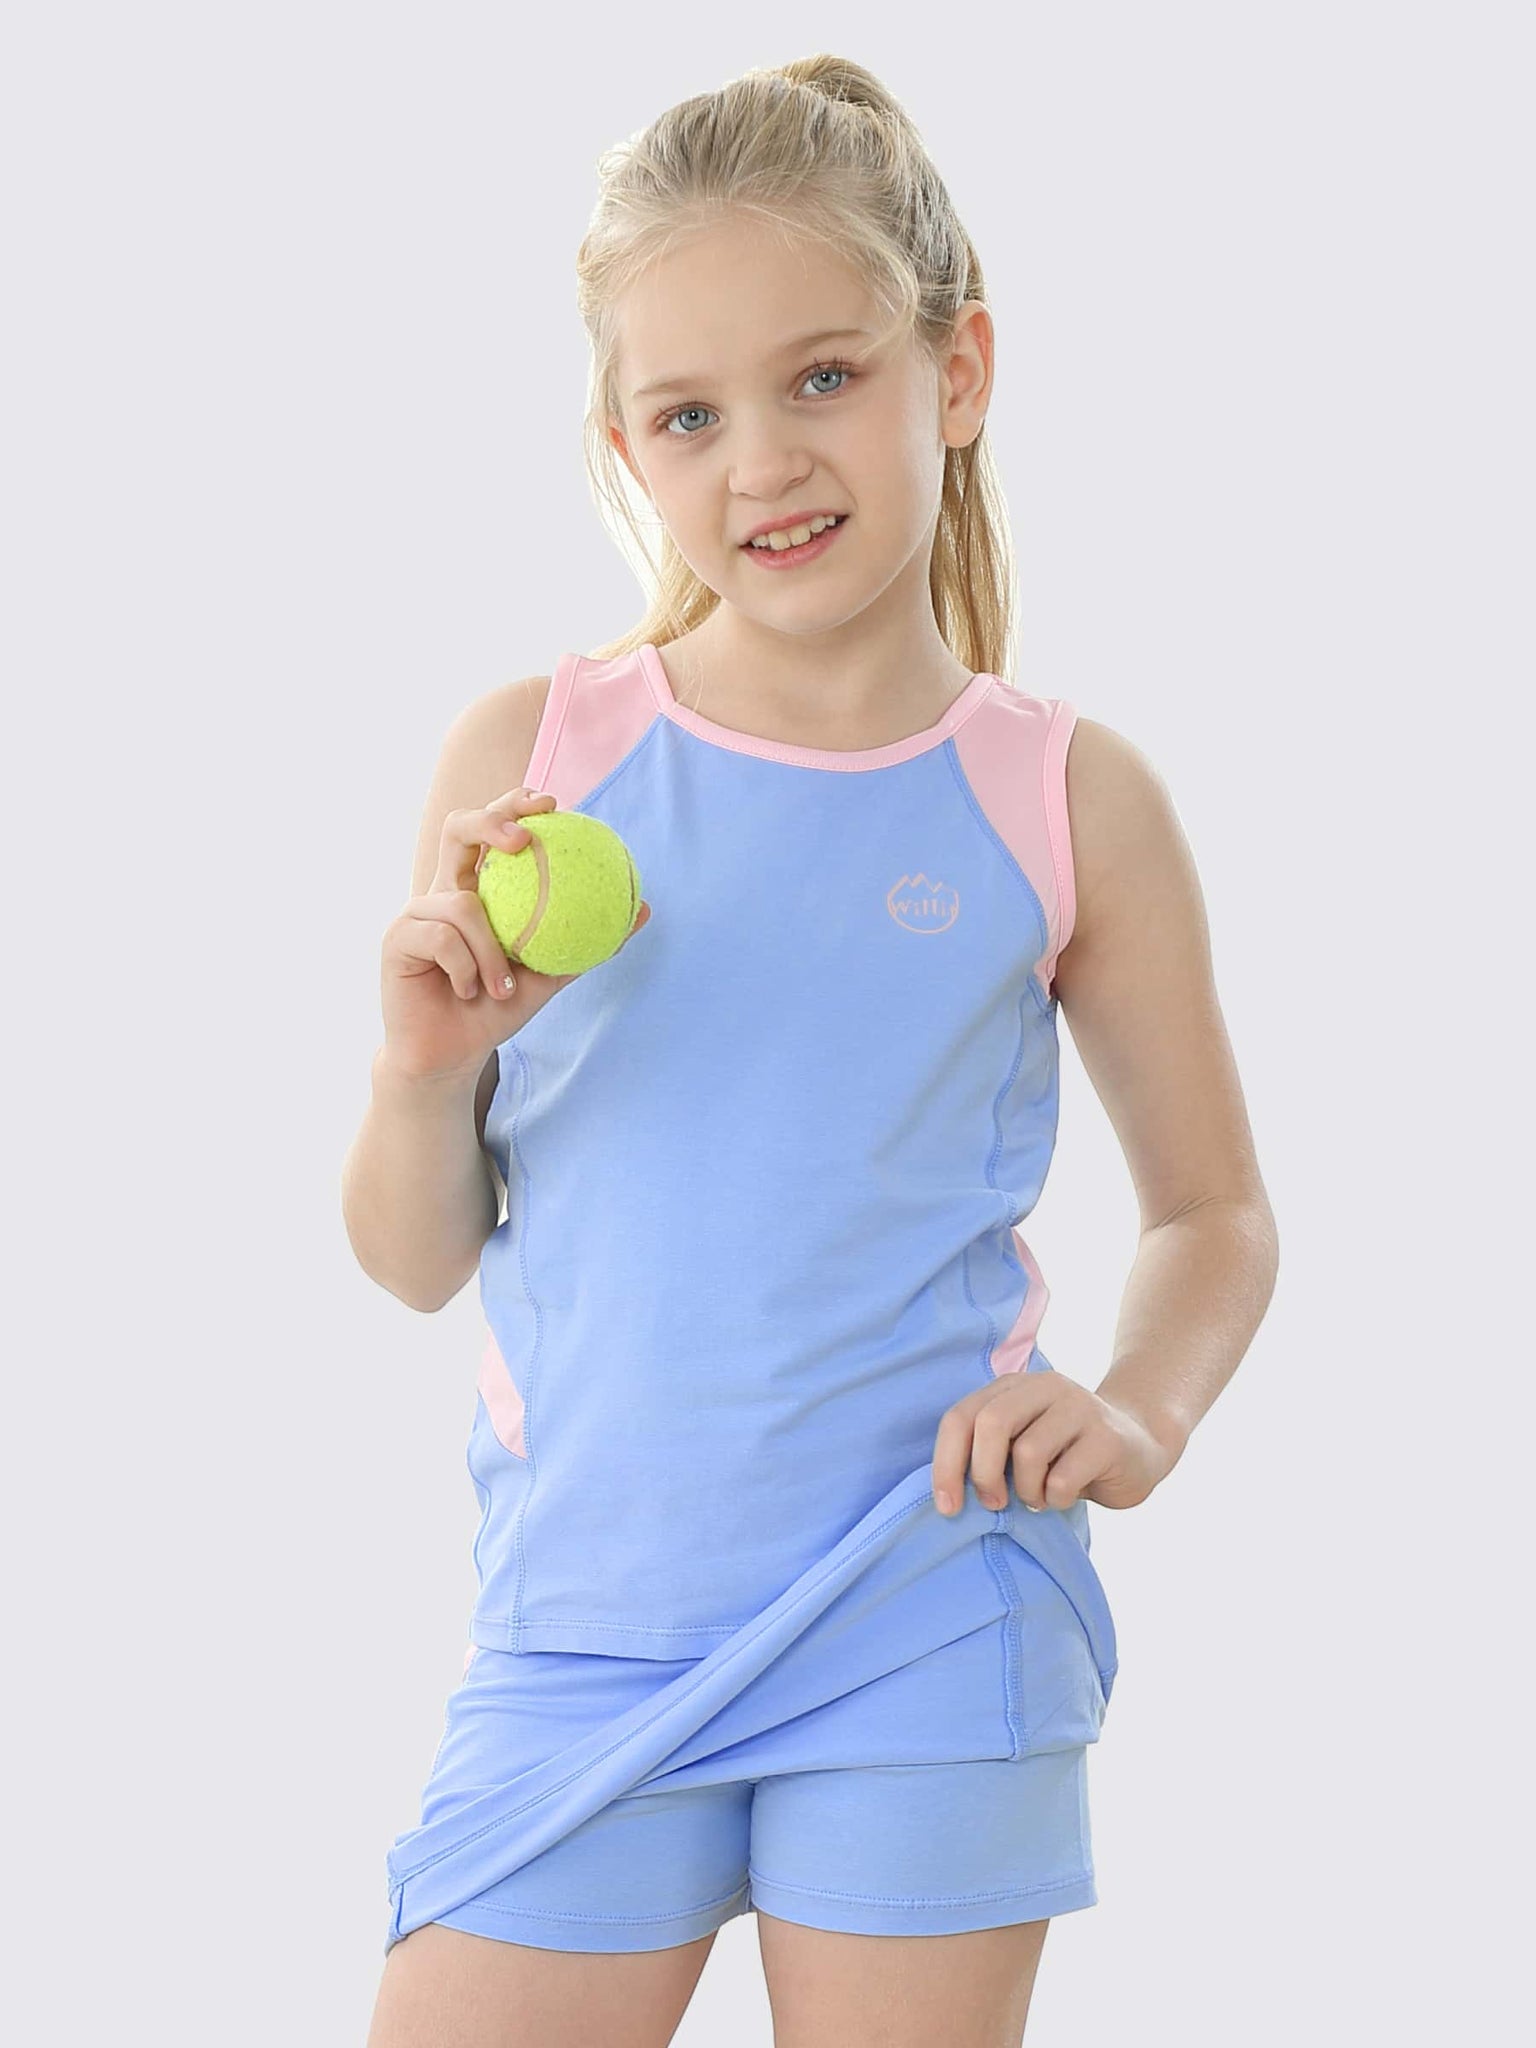 Willit Girls' Tennis Outfit_Blue_model2